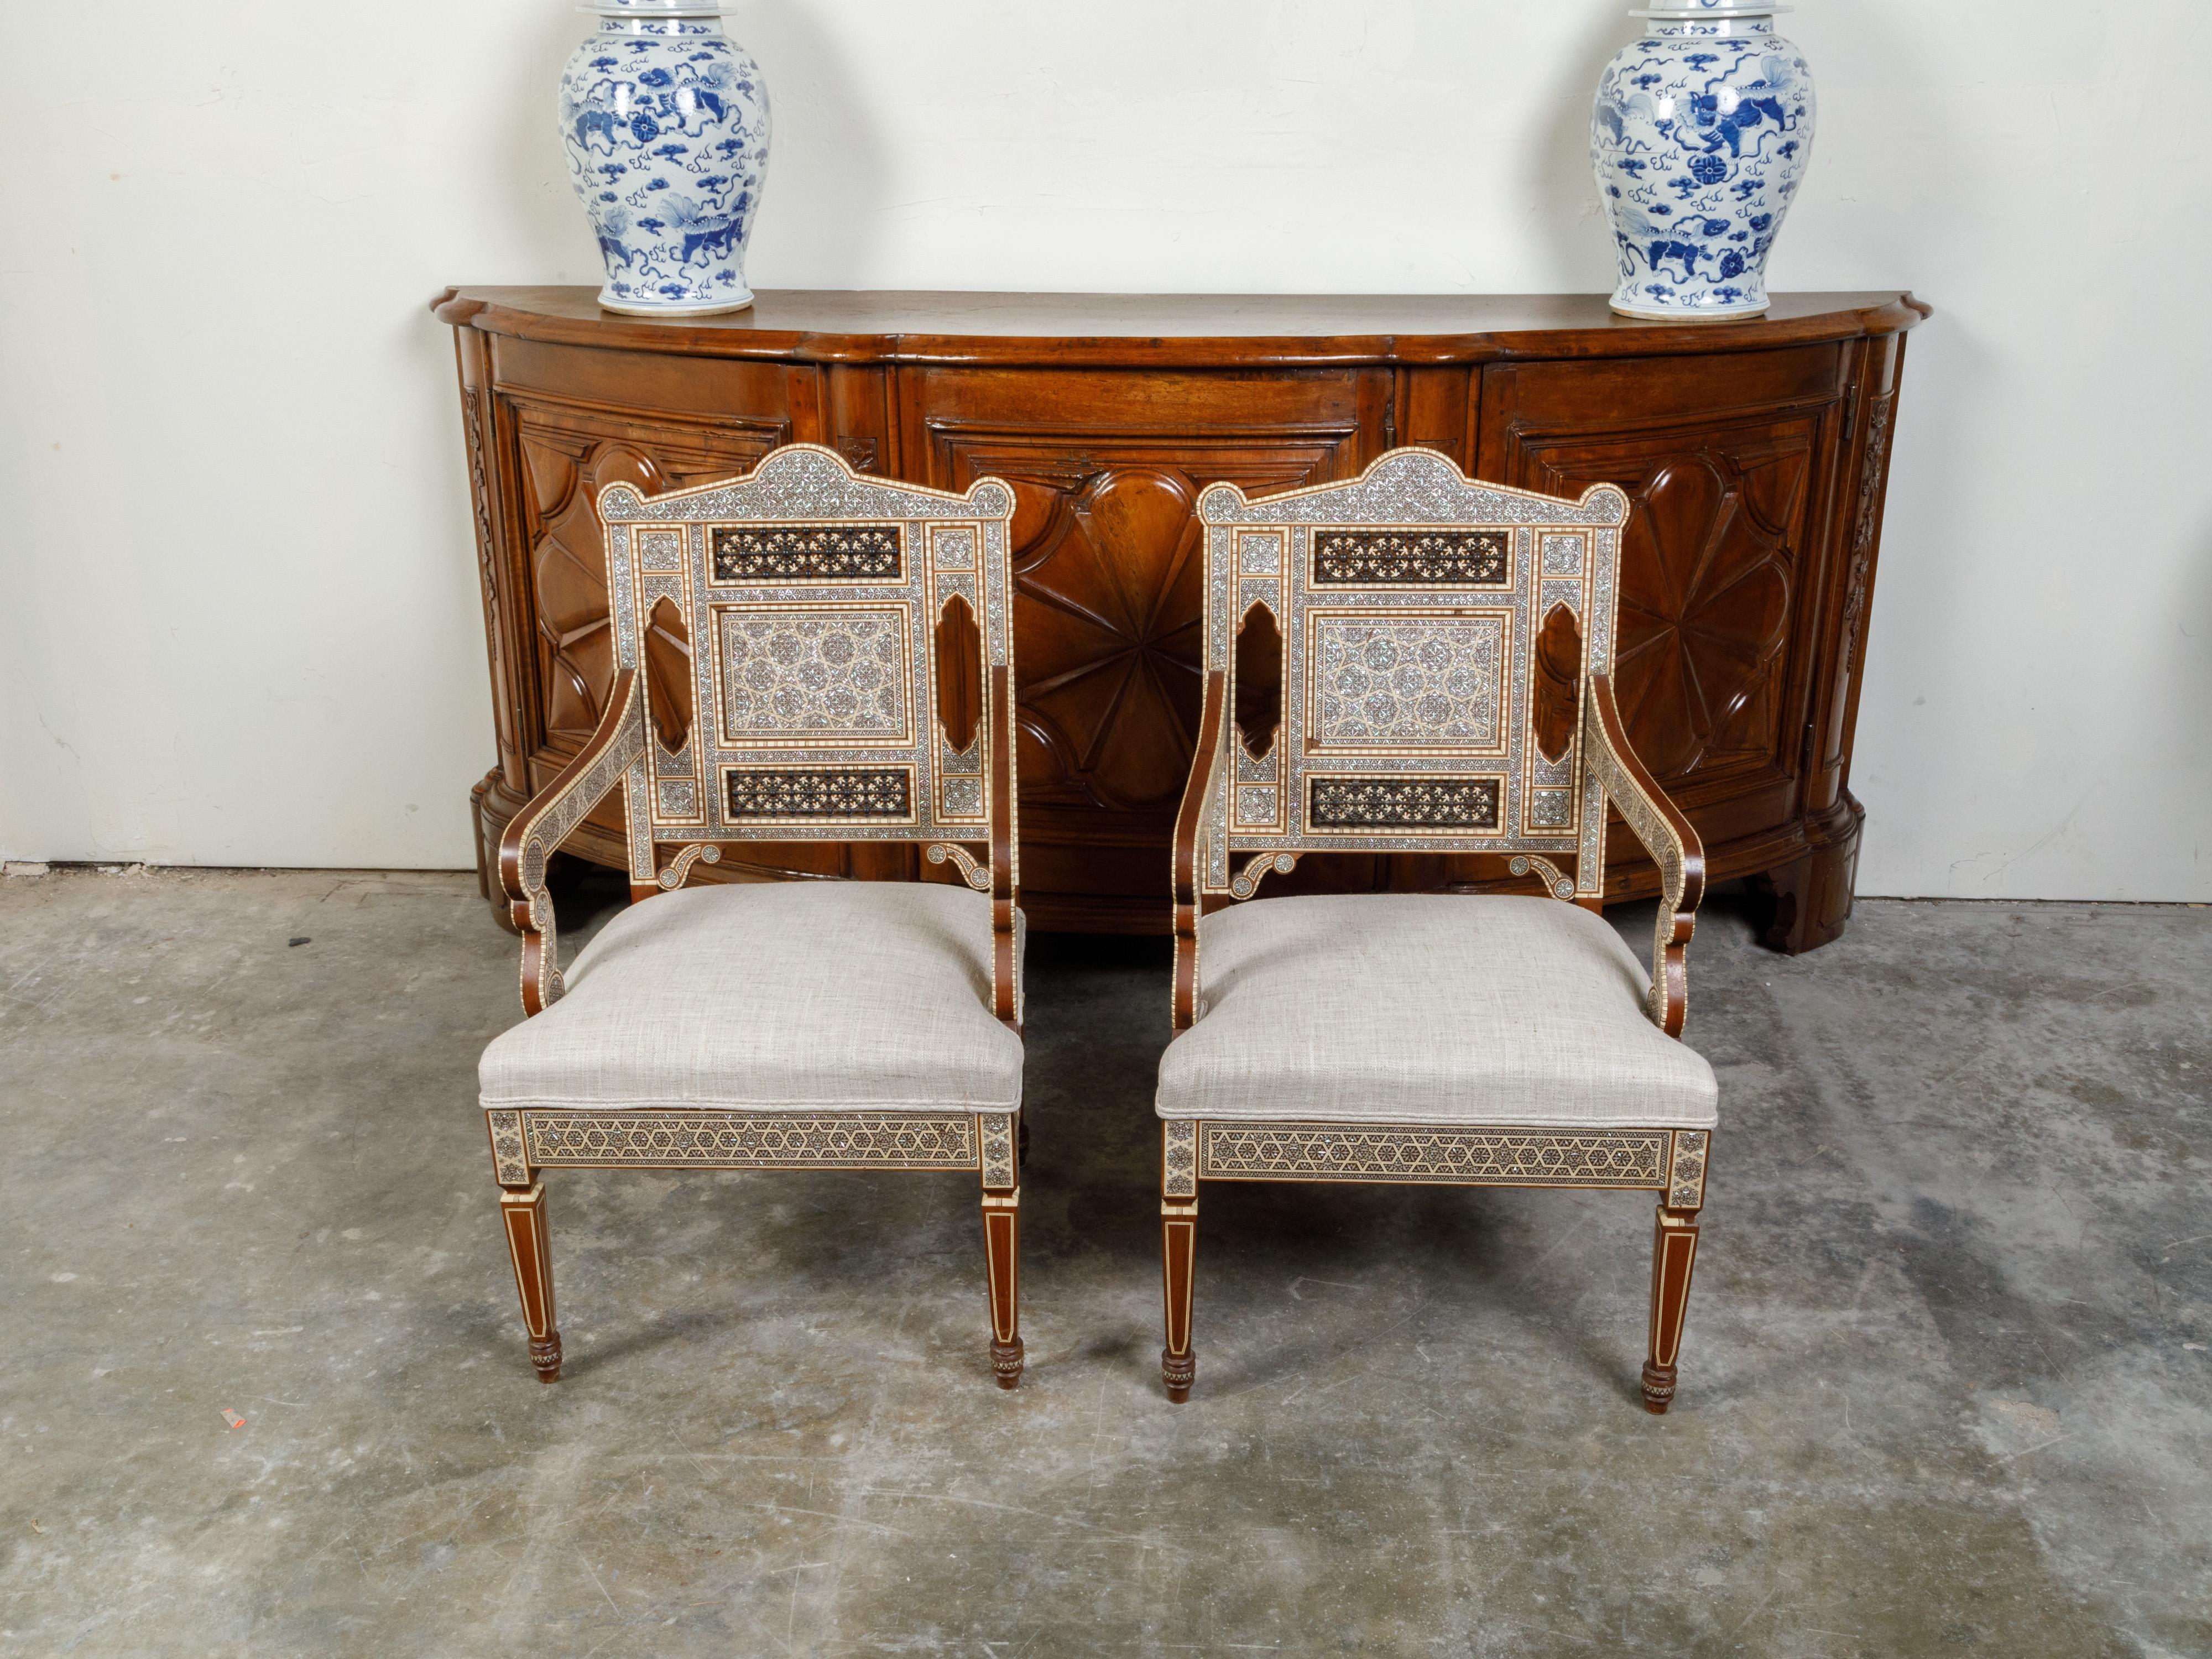 A pair of Moroccan armchairs from the mid 20th century, with geometric mother-of-pearl inlay and new upholstery. Created in Morocco during the mid-century period, each of this pair of armchairs captures our attention with its stunning back adorned